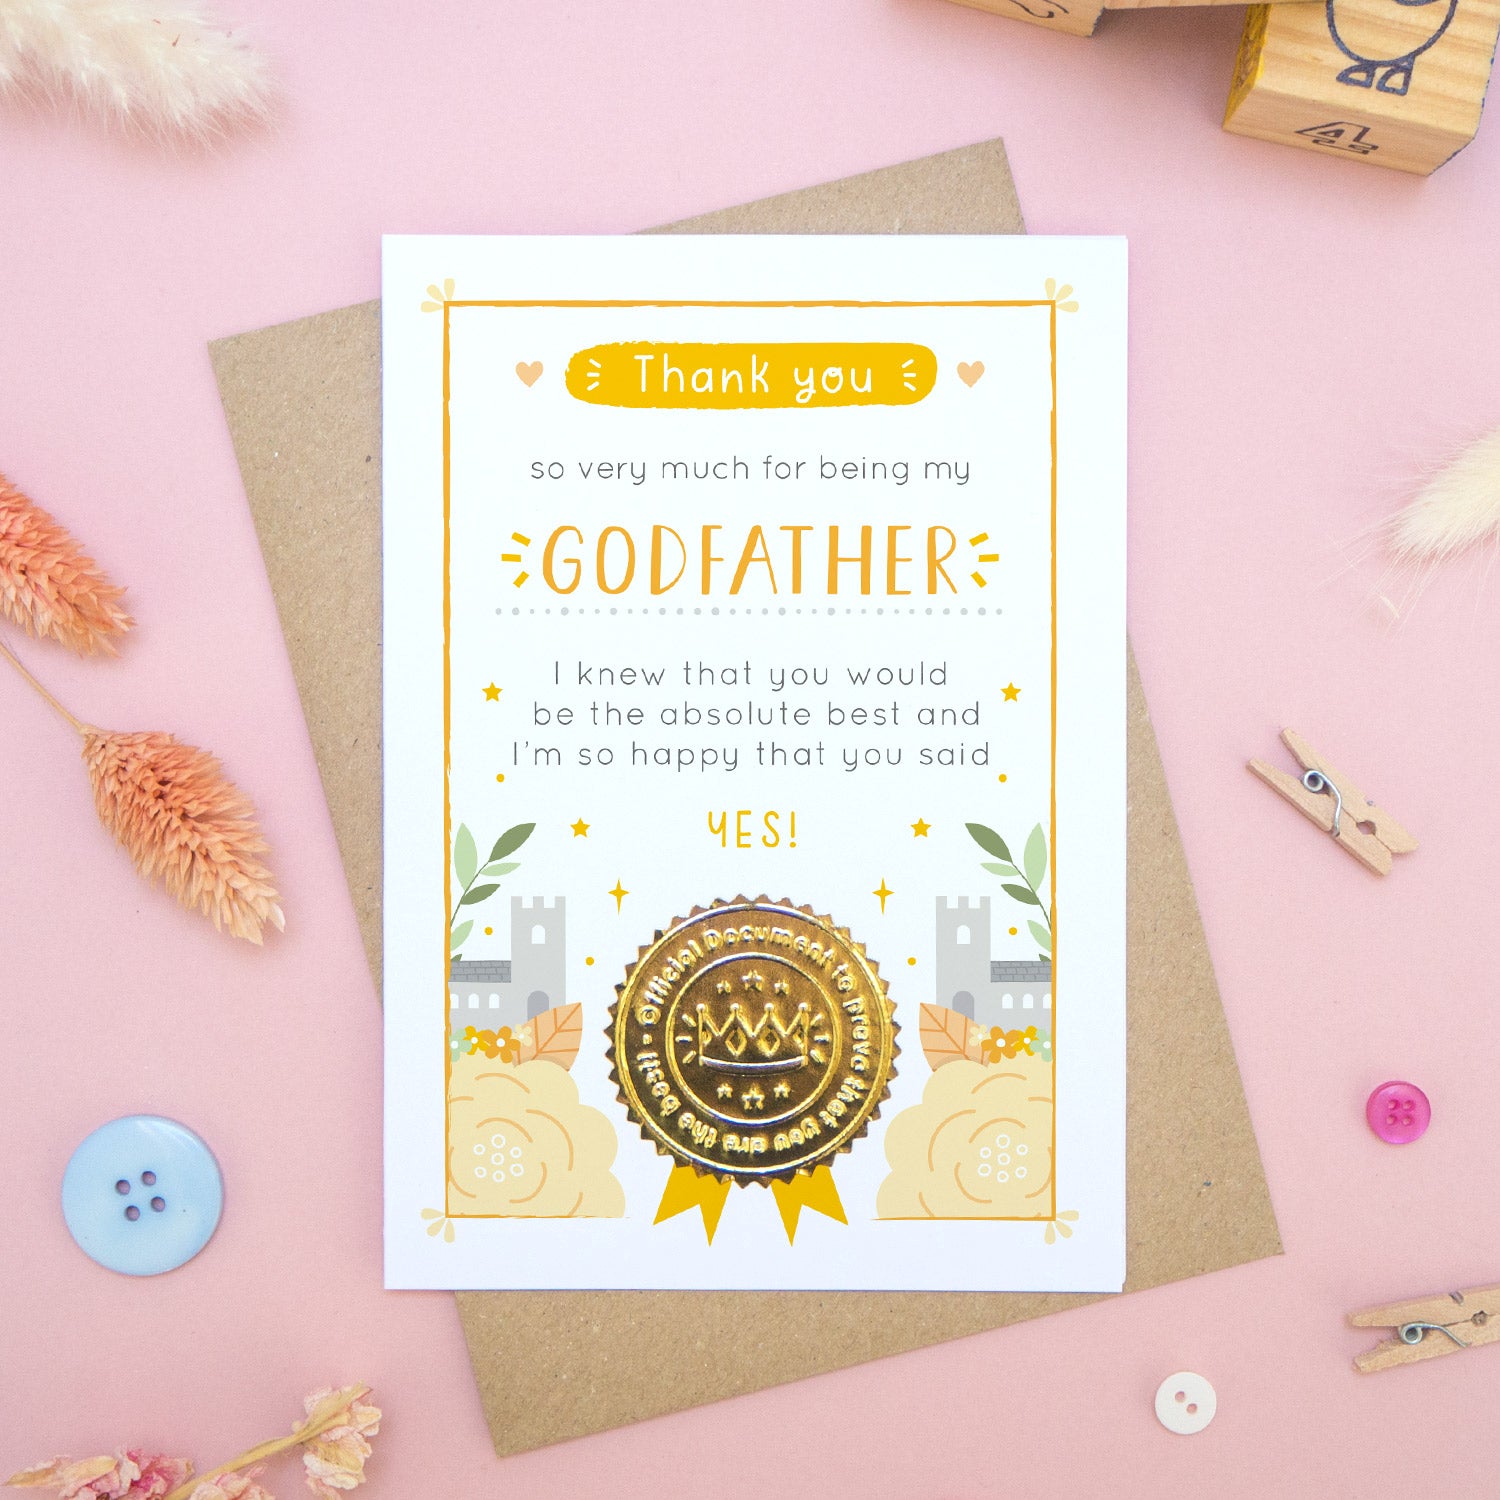 A ‘thank you for being my godfather’ certificate card with a shiny gold seal in the orange colour palette lying flatlay on top of a kraft brown envelope on a pink surface surrounded by building blocks, buttons and dry flowers.